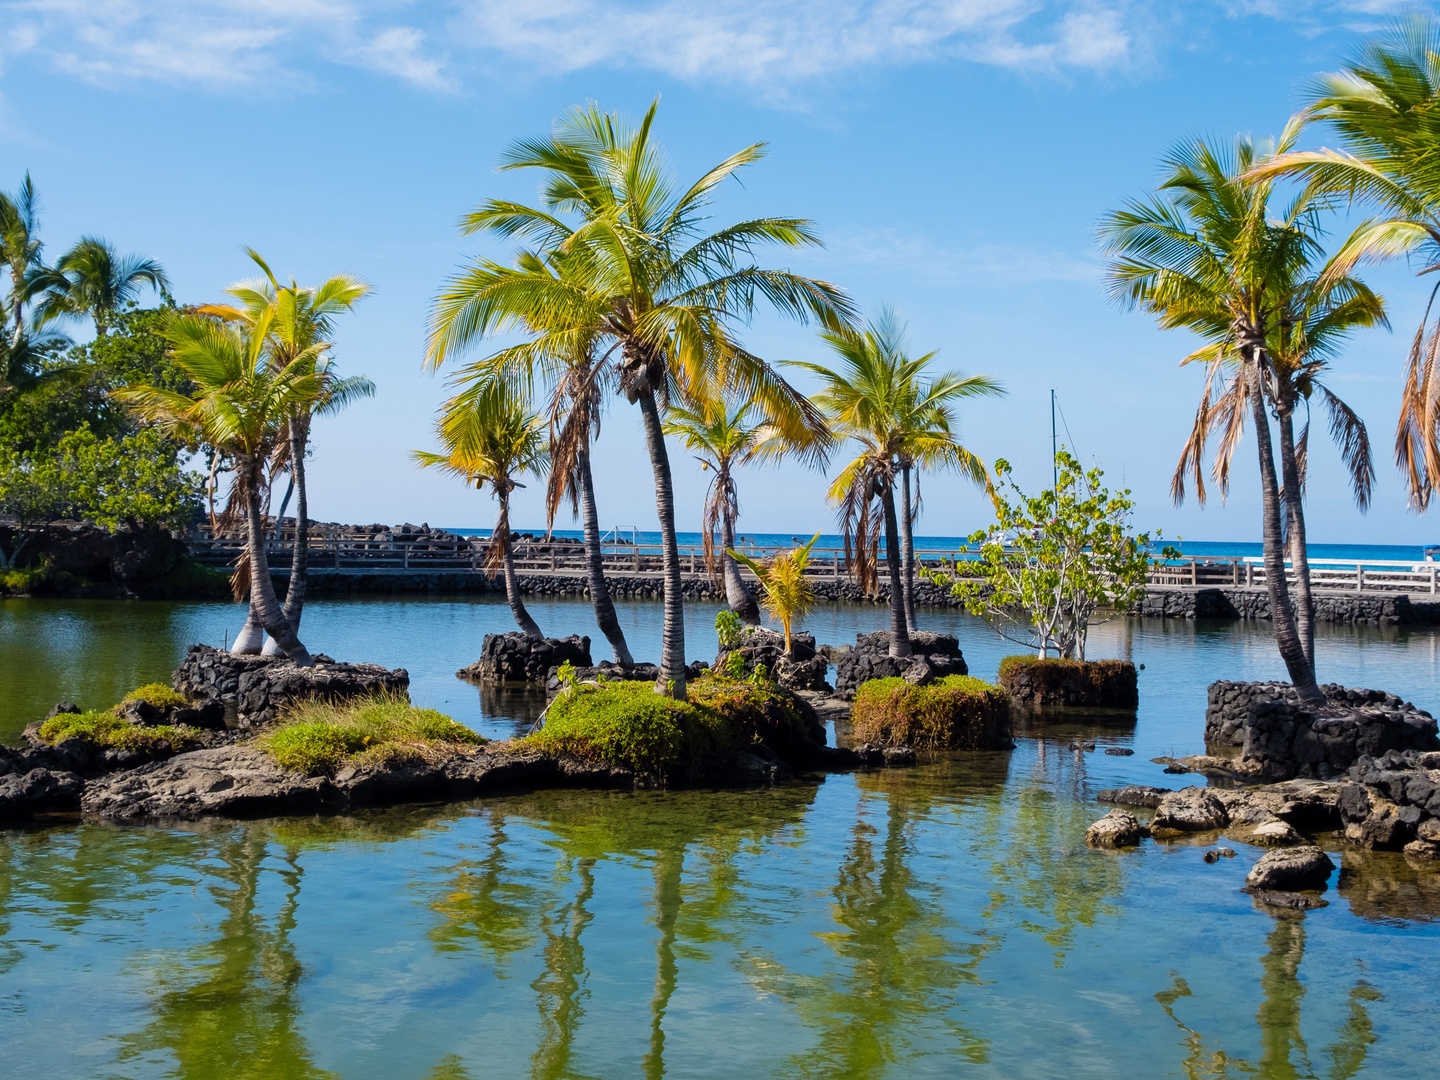 Kamuela Vacation Rentals, Kulalani 1701 at Mauna Lani - Relax and let the rhythm of the swaying trees by the water transport you to a tranquil state of mind